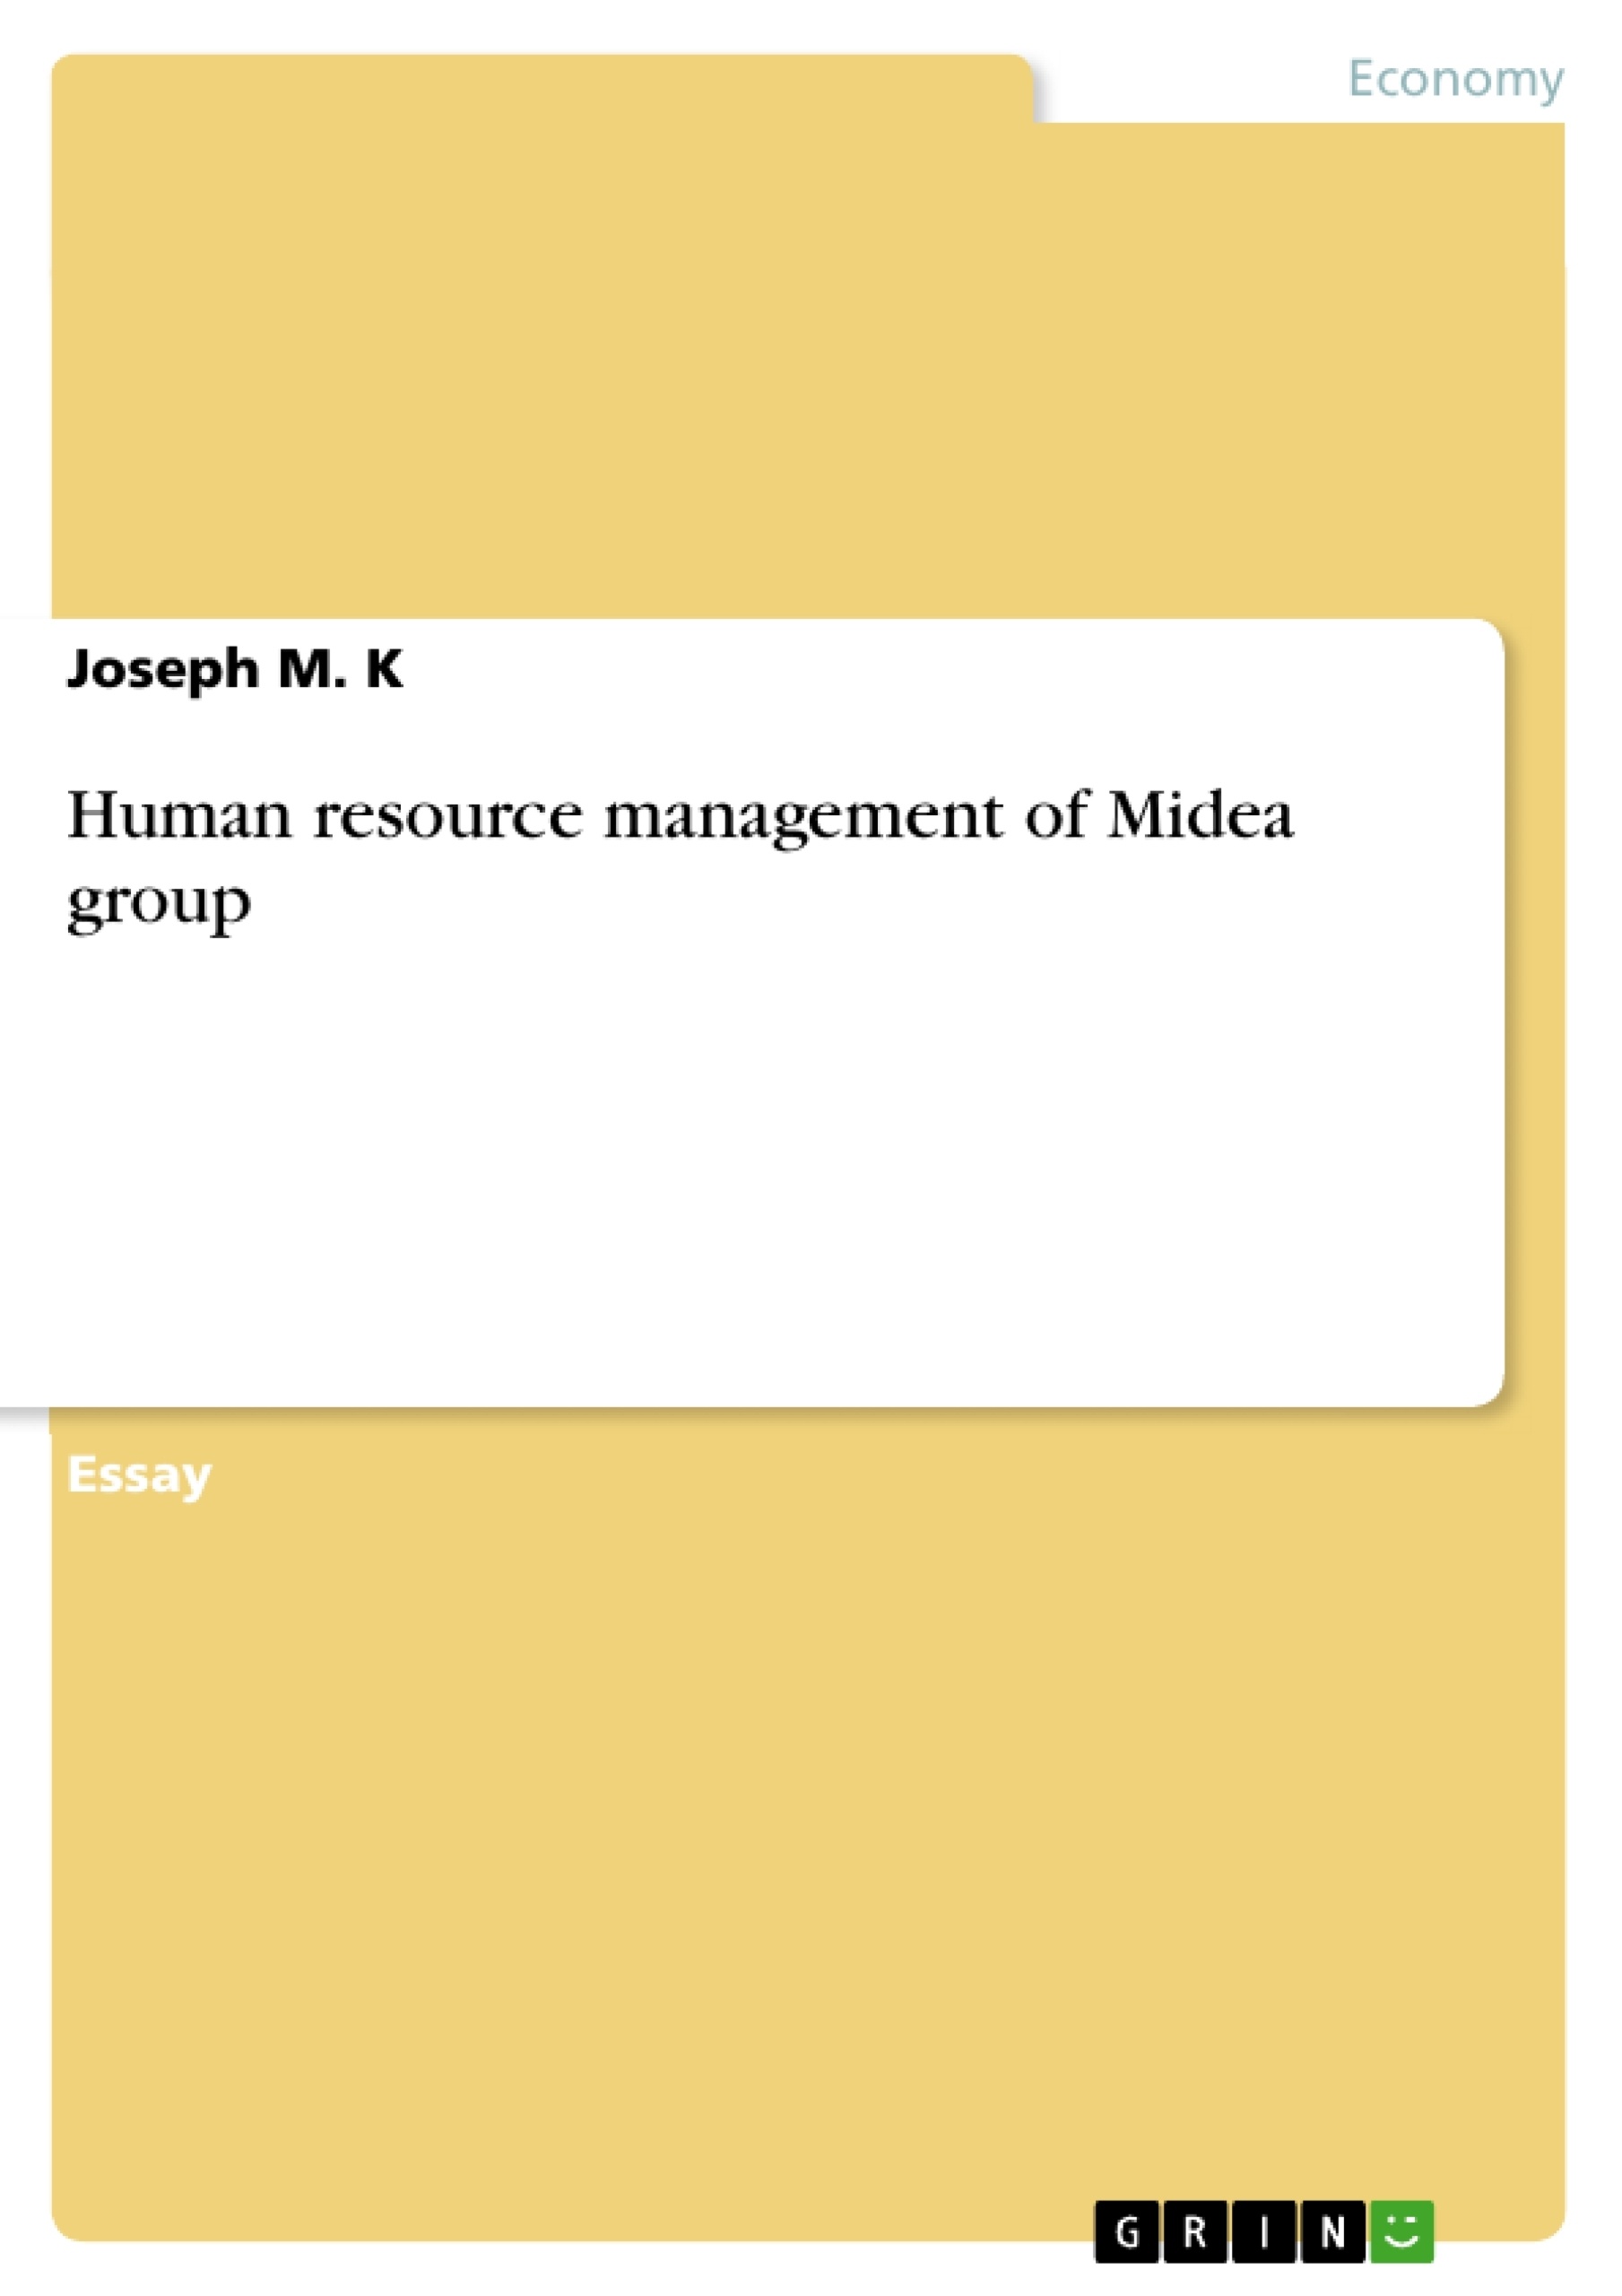 Title: Human resource management of Midea group